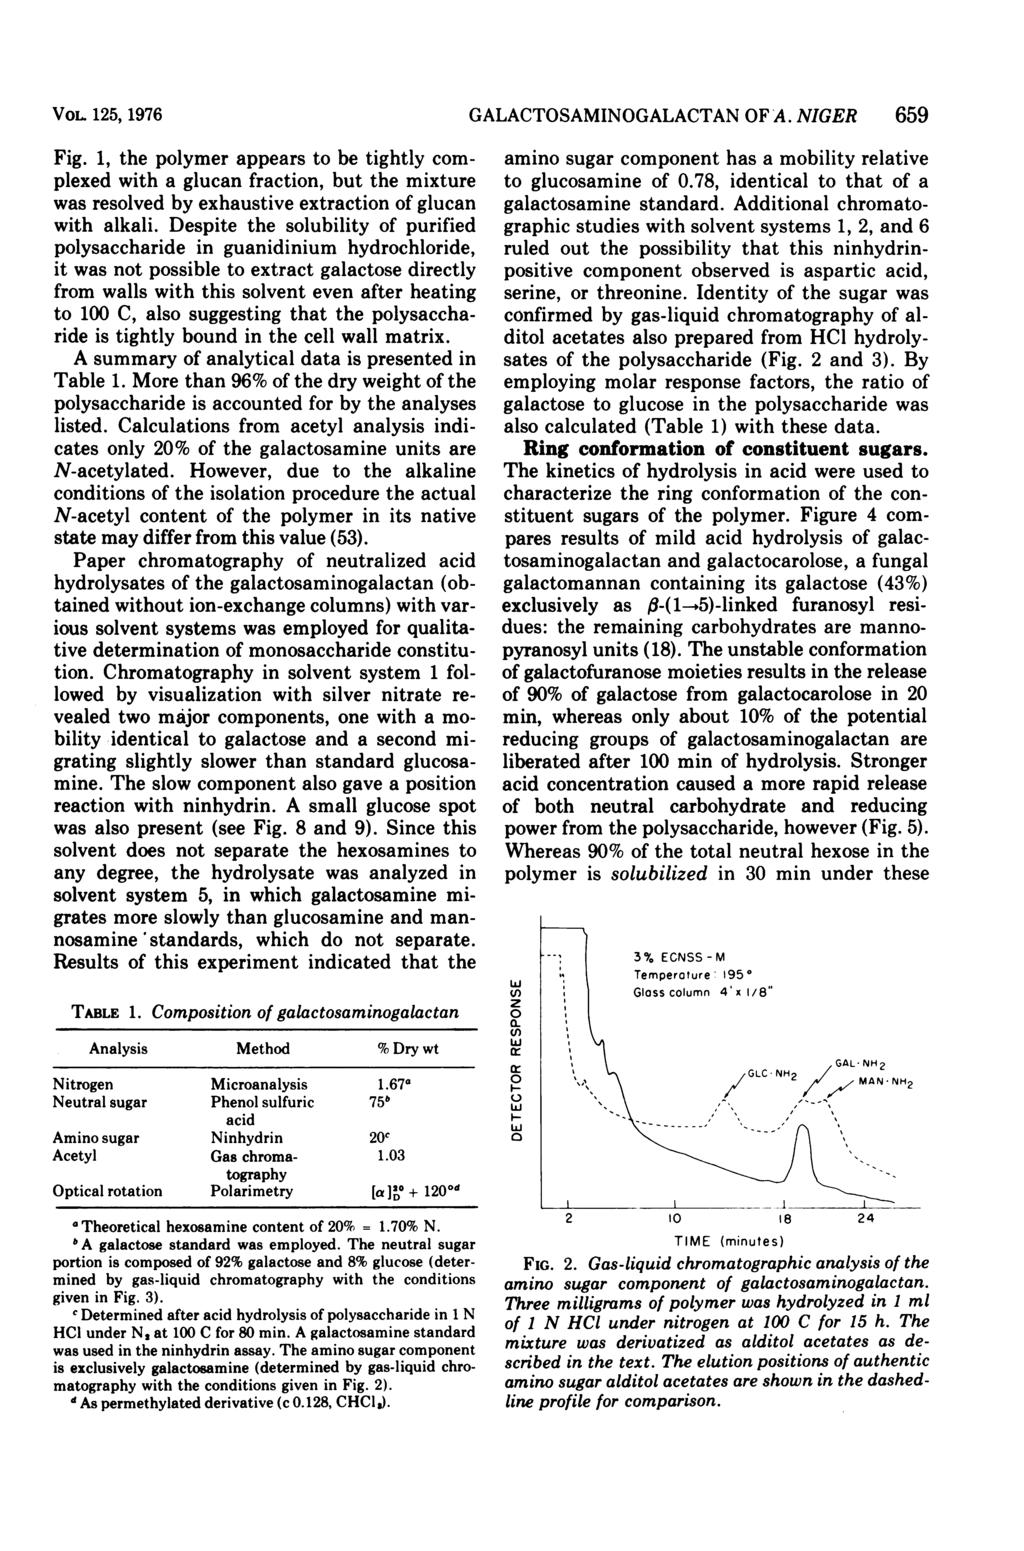 VOL 125, 1976 Fig. 1, the polymer appears to be tightly complexed with a glucan fraction, but the mixture was resolved by exhaustive extraction of glucan with alkali.